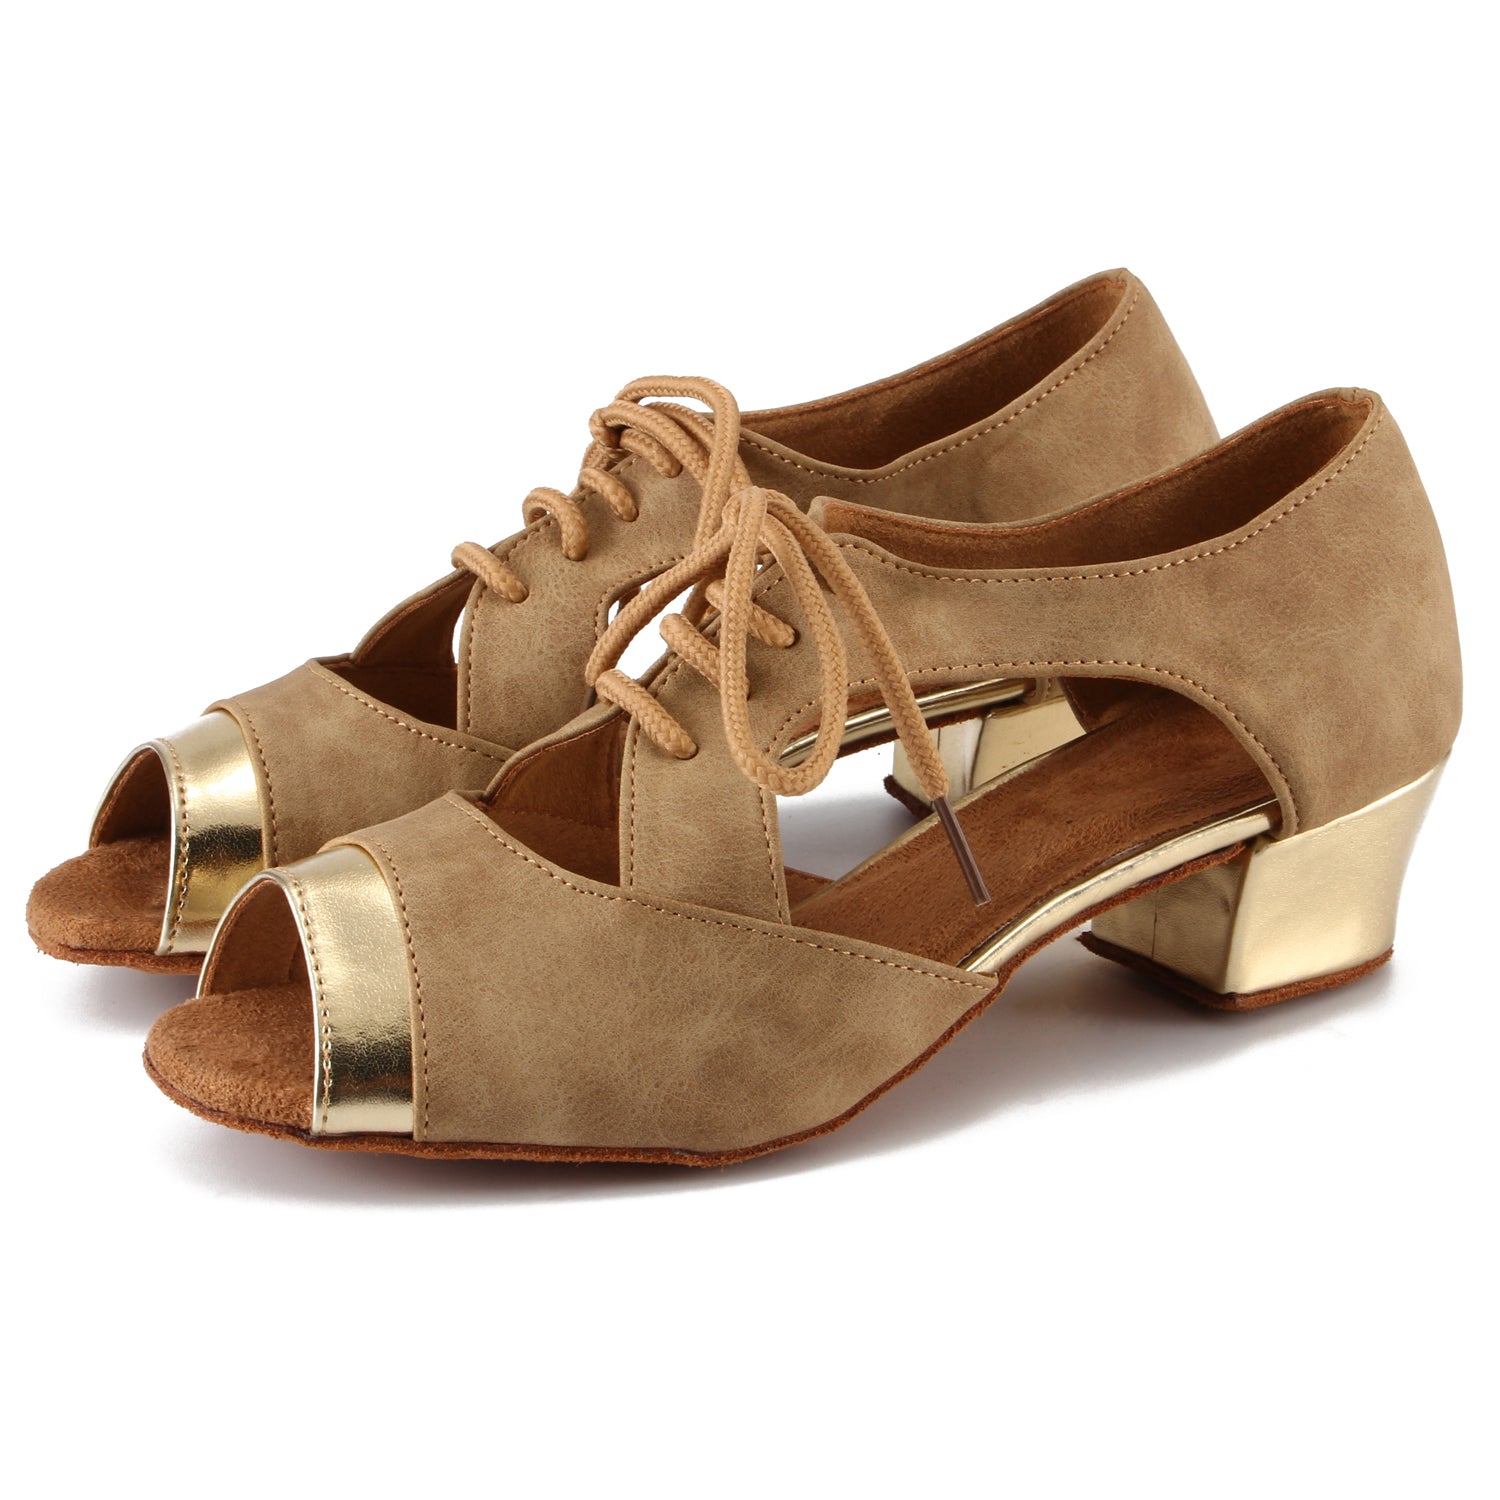 Women Ballroom Dancing Shoes with Suede Sole, Lace-up Open-toe Design in Brown and Gold for Tango Latin Practice (PD-3004B)9